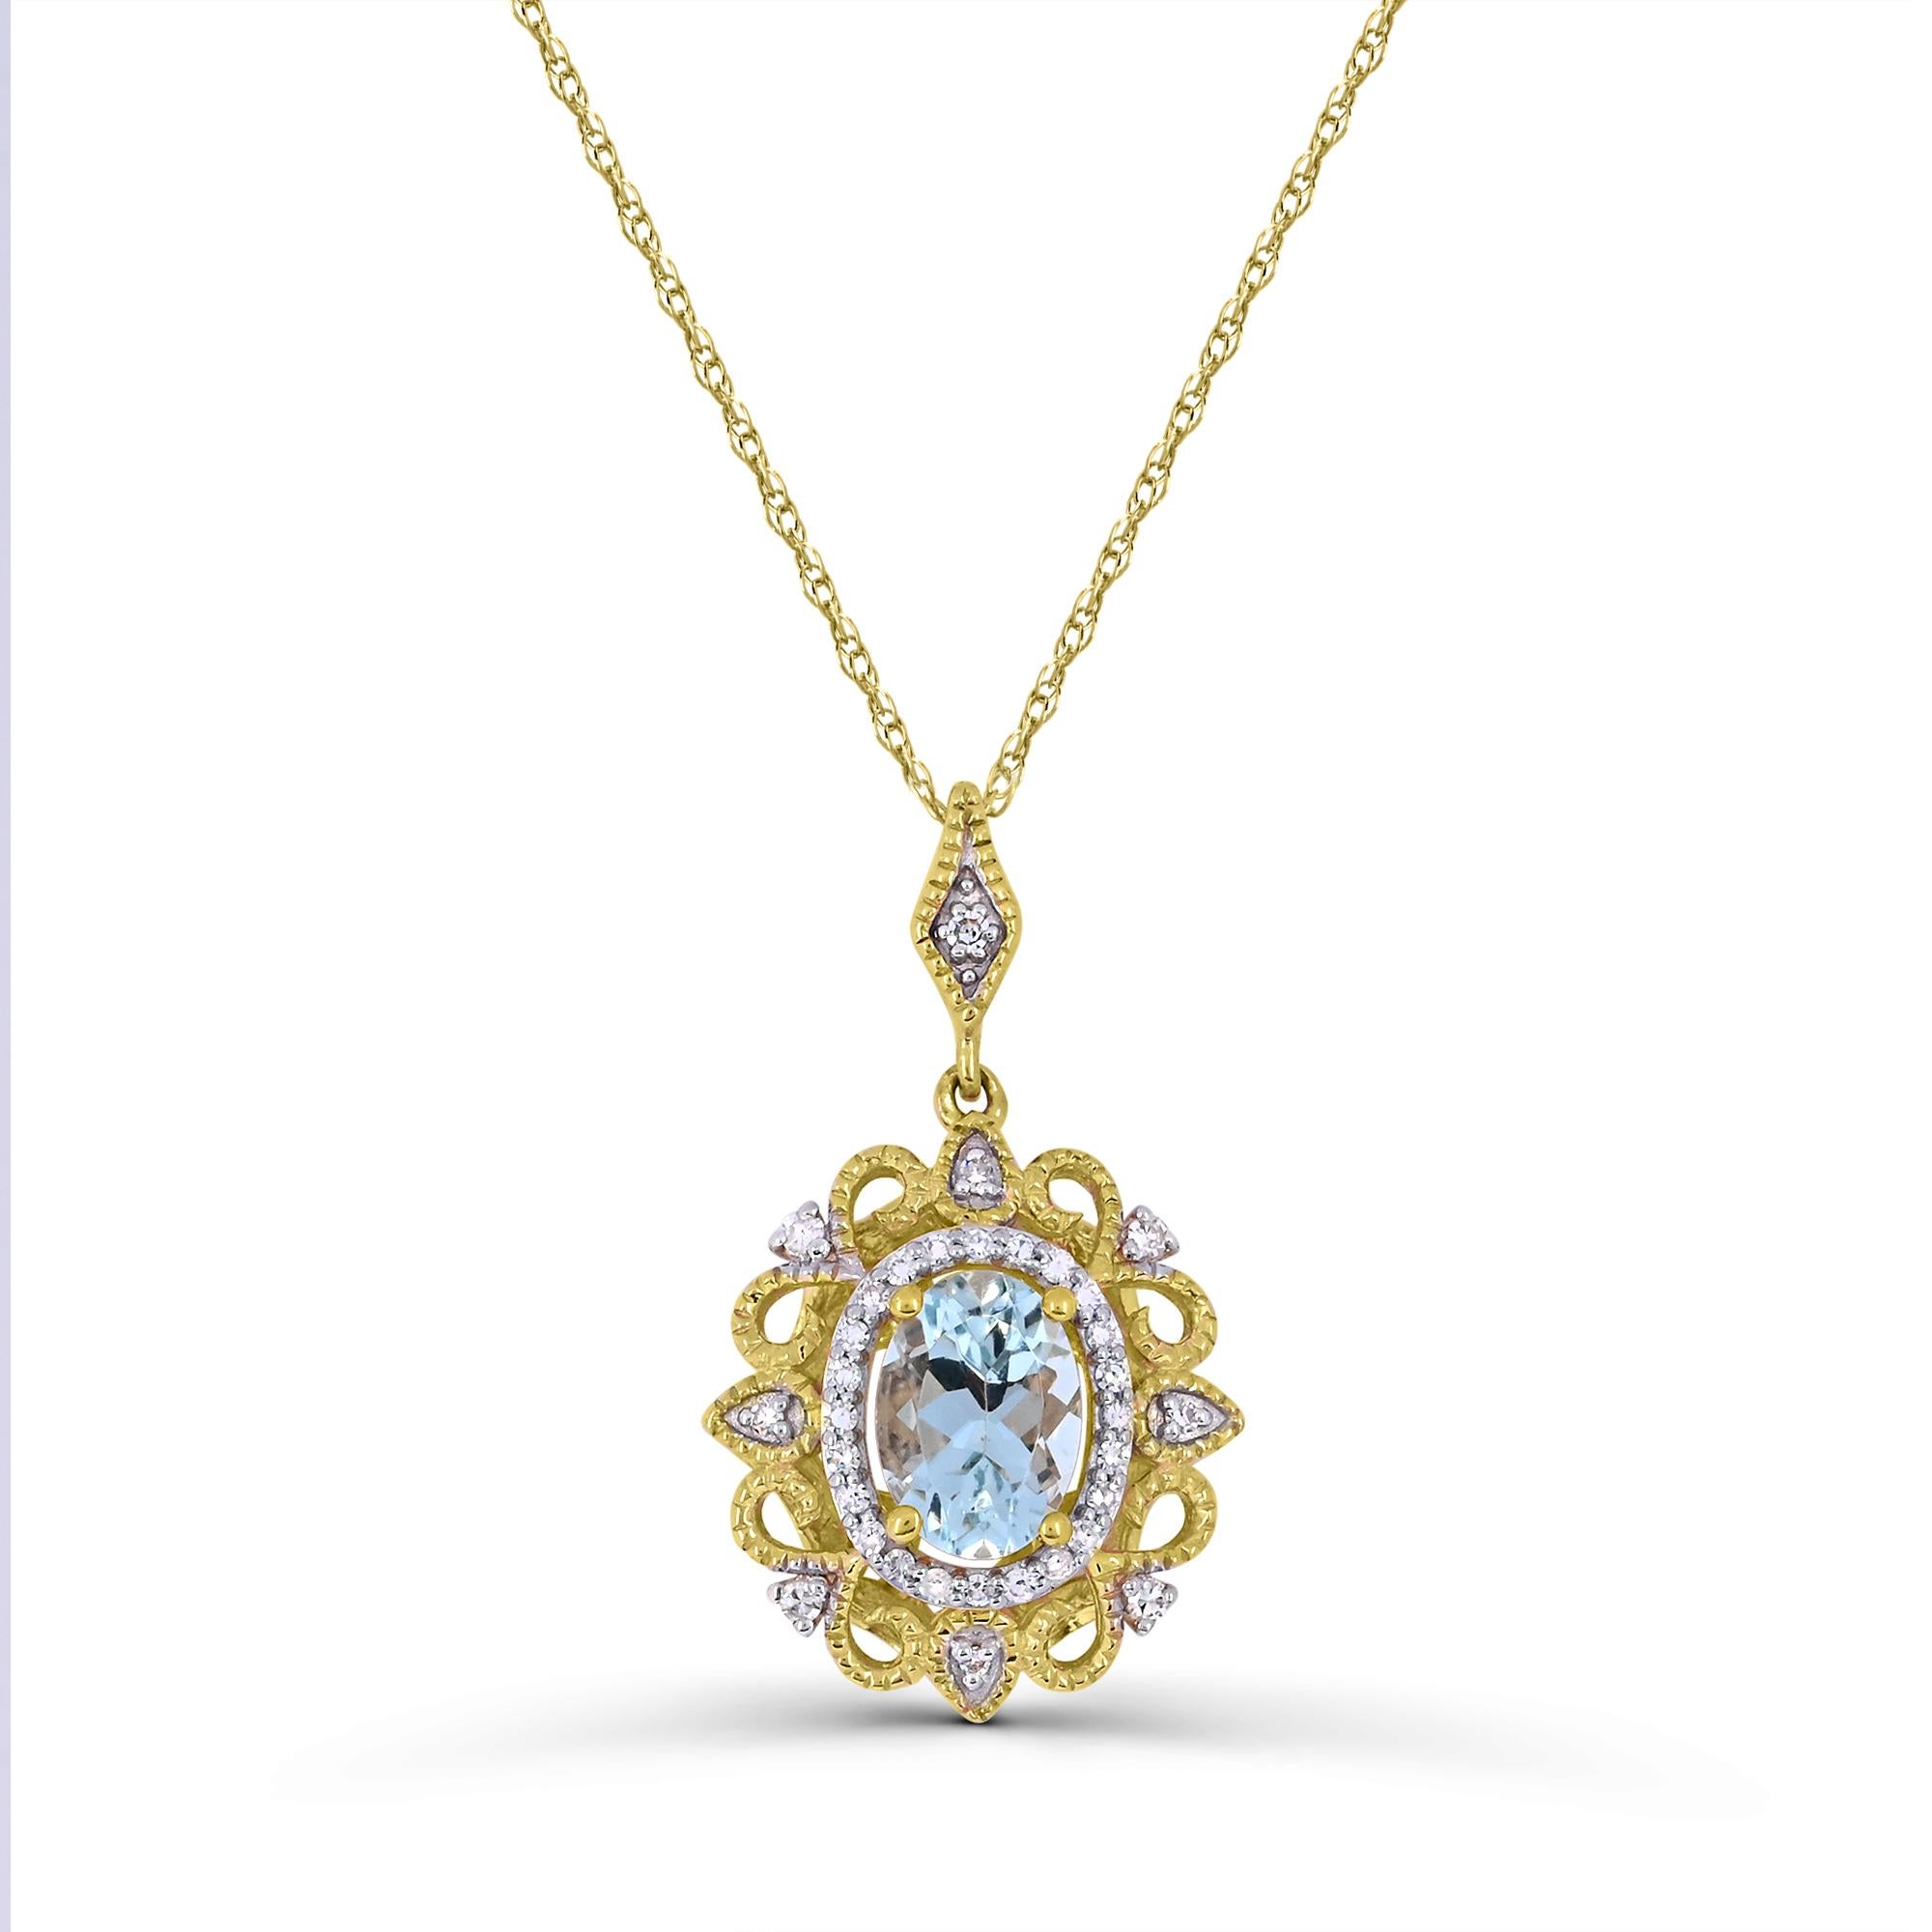 Indulge in the elegance of our Oval Aquamarine and Round White Diamond Pendant Necklace in 14K Yellow Gold. Crafted with meticulous attention to detail, this necklace boasts a stunning combination of one oval aquamarine accented by sparkling round